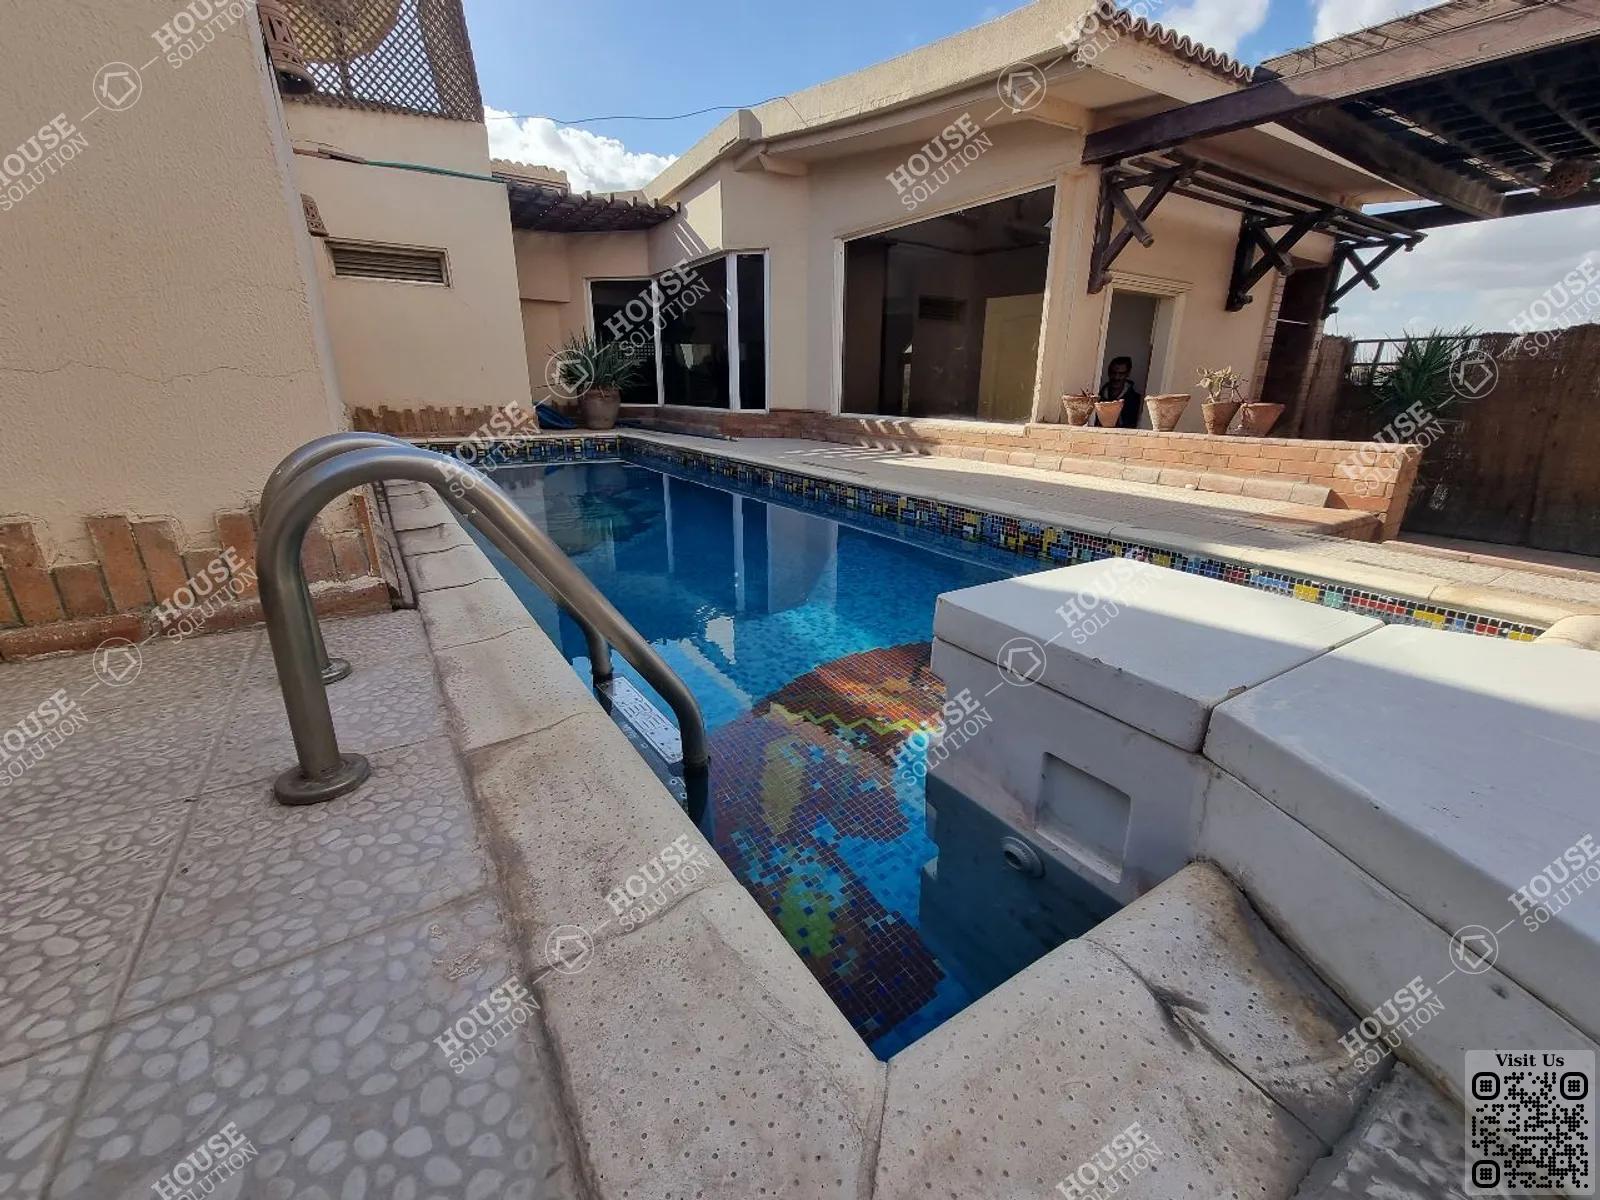 PRIVATE SWIMMING POOL  @ Penthouses For Rent In Maadi Maadi Sarayat Area: 550 m² consists of 5 Bedrooms 4 Bathrooms Semi furnished 5 stars #3962-1